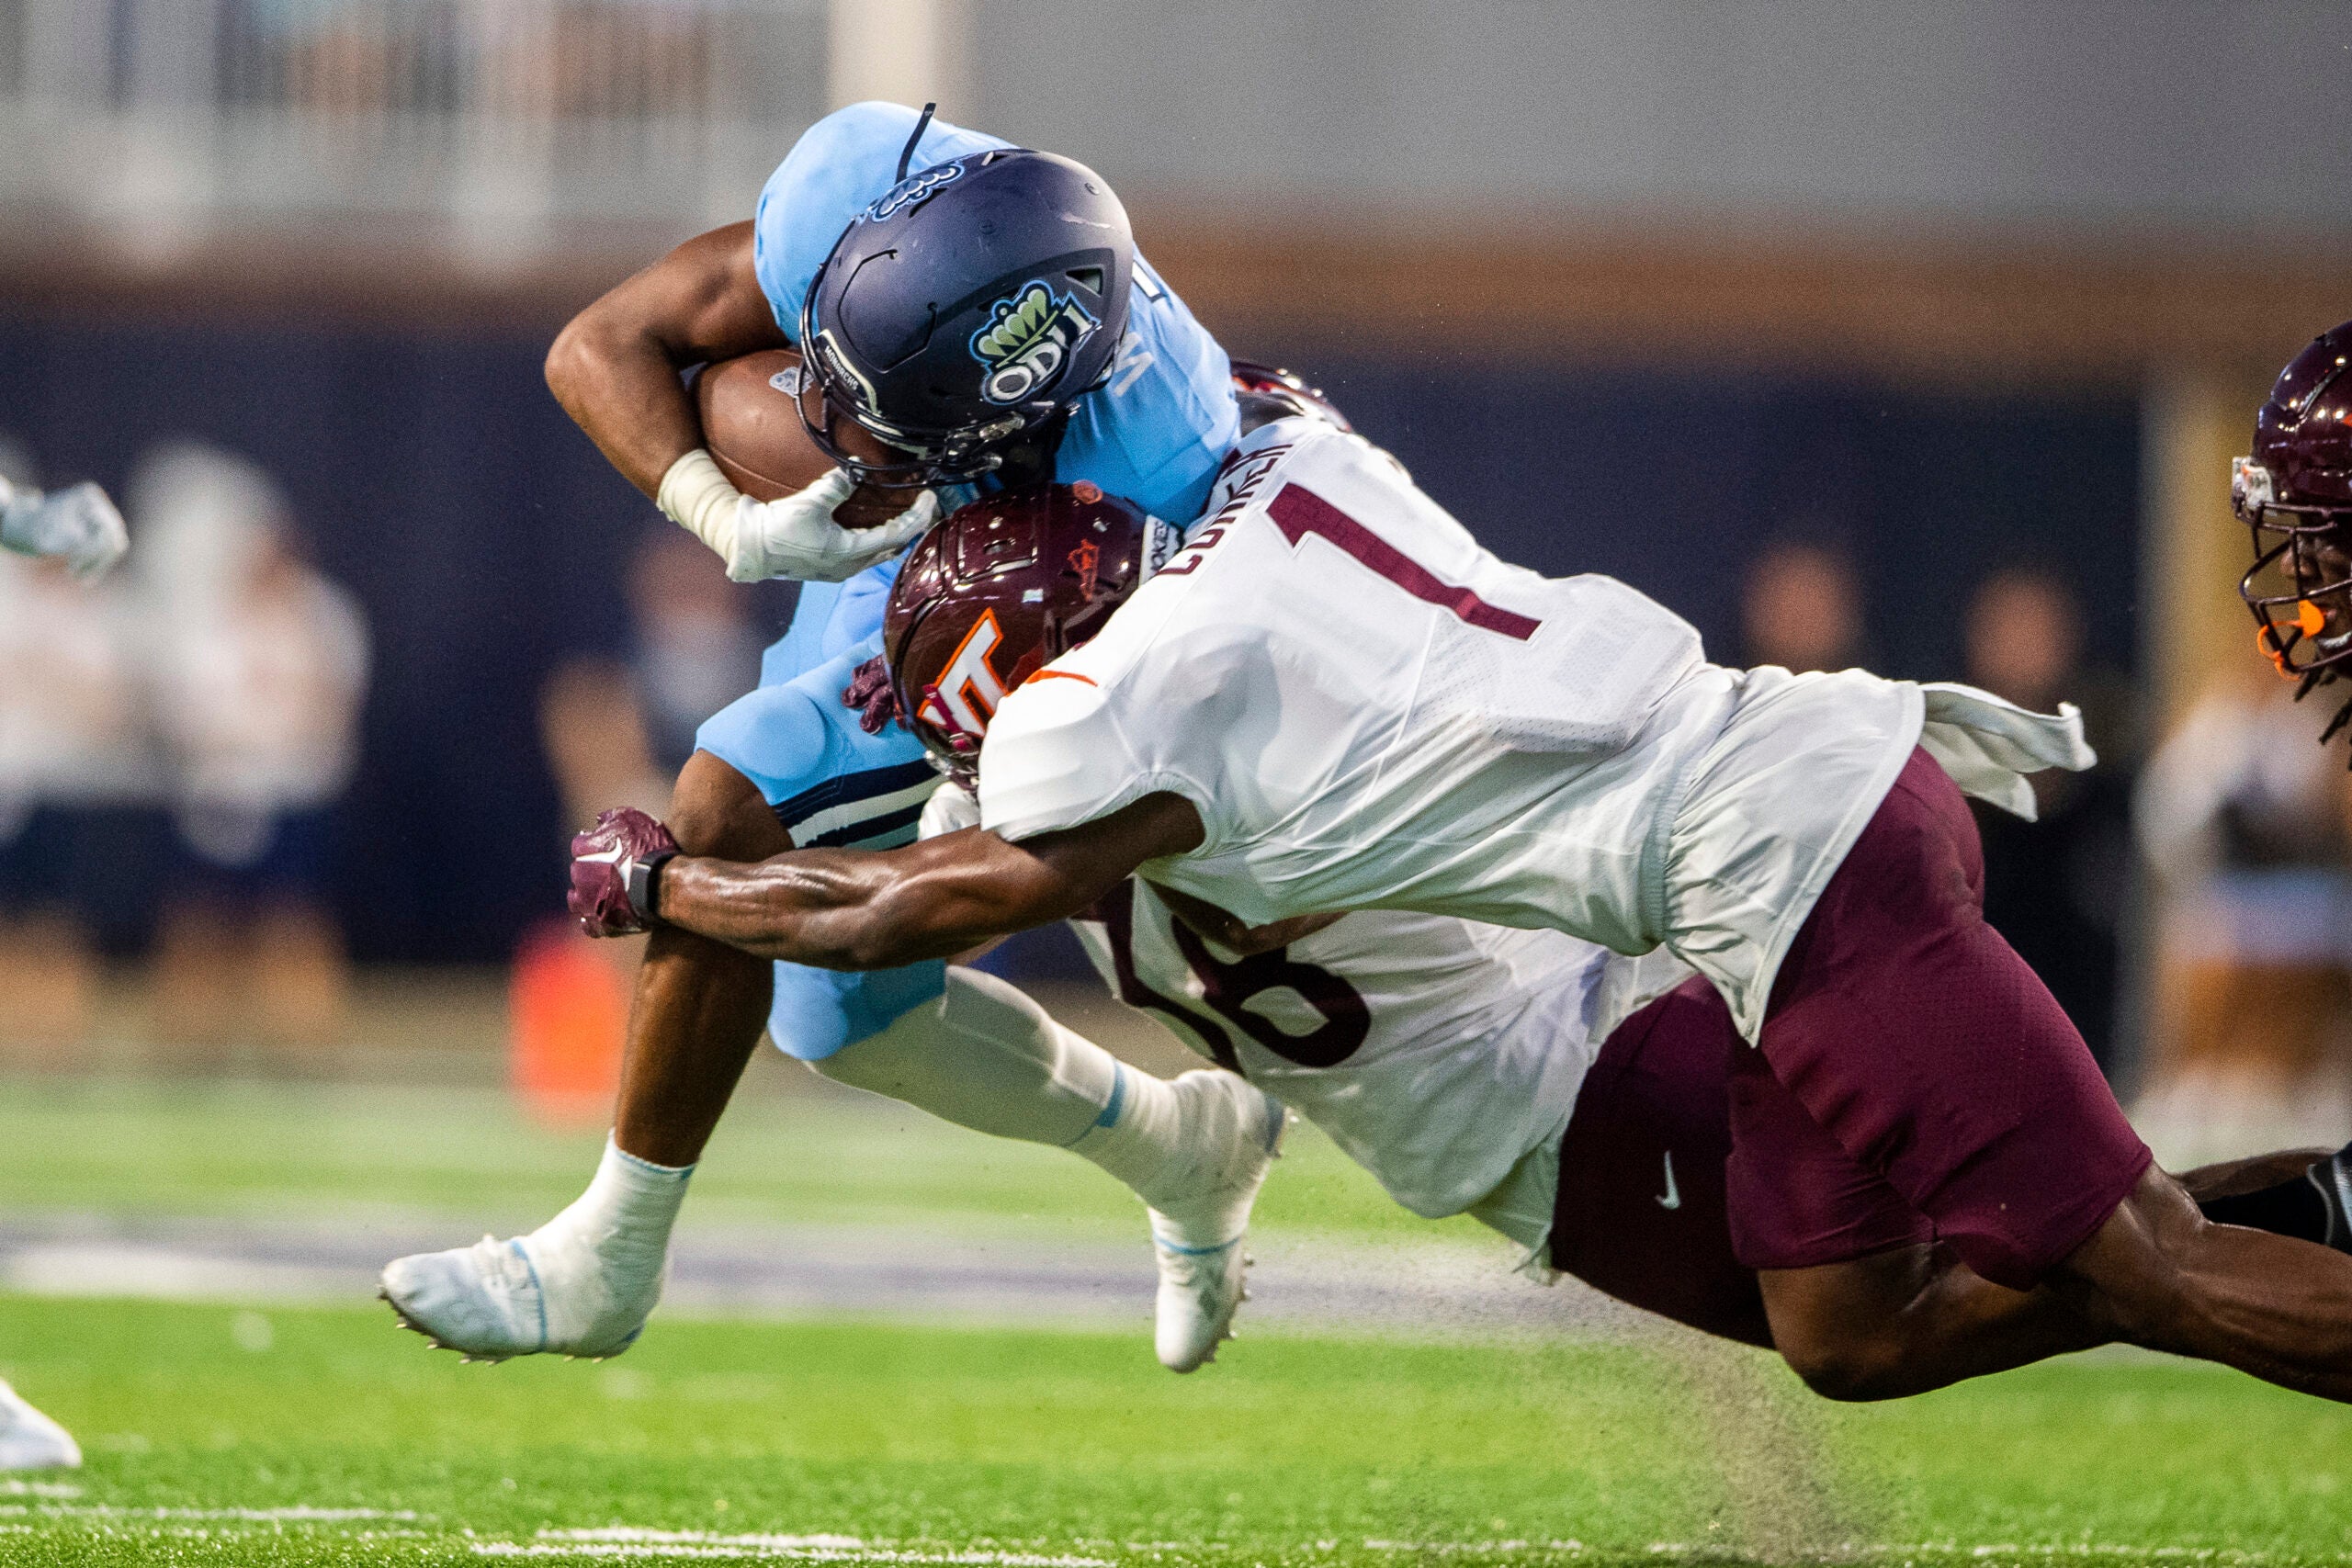 Old Dominion running back Keshawn Wicks, top, is brought down by Virginia Tech linebacker Jayden McDonald (38) and defensive back Chamarri Conner (1) during an NCAA college football game on Friday, Sept. 2, 2022, in Norfolk, Va.